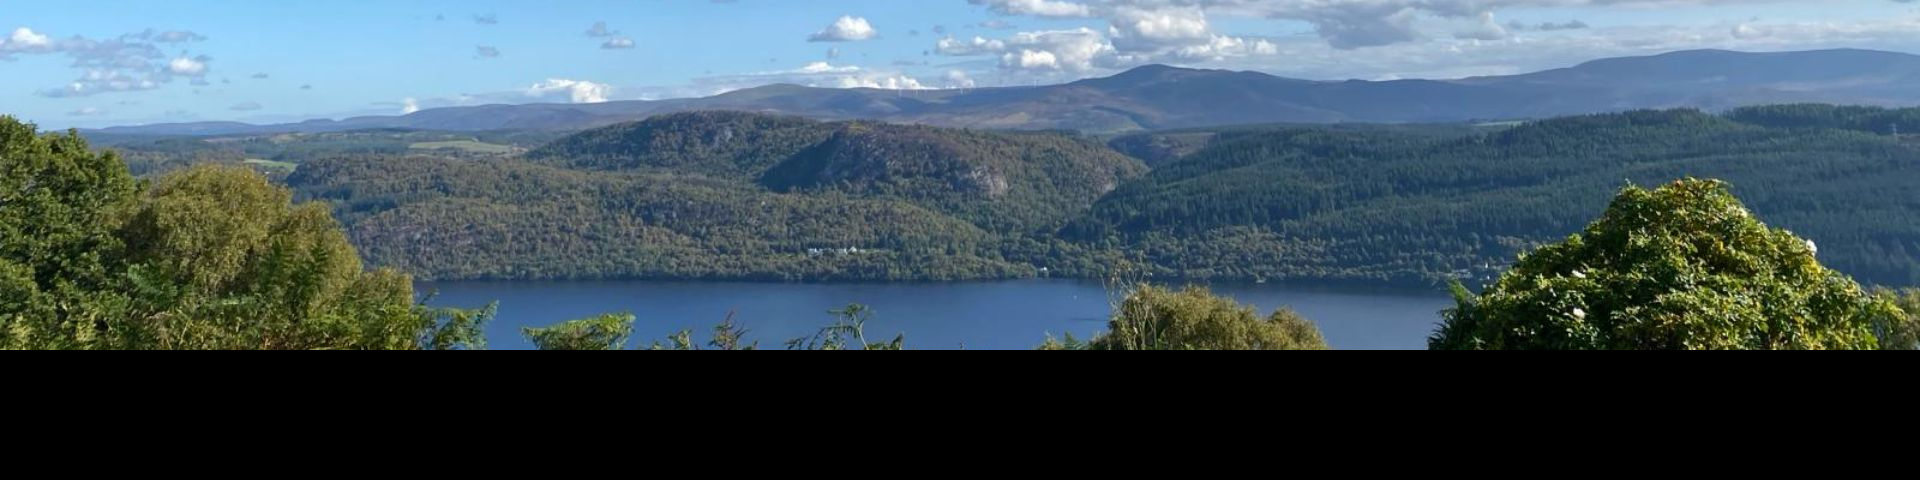 Image of a view looking out on Loch Ness on a sunny day